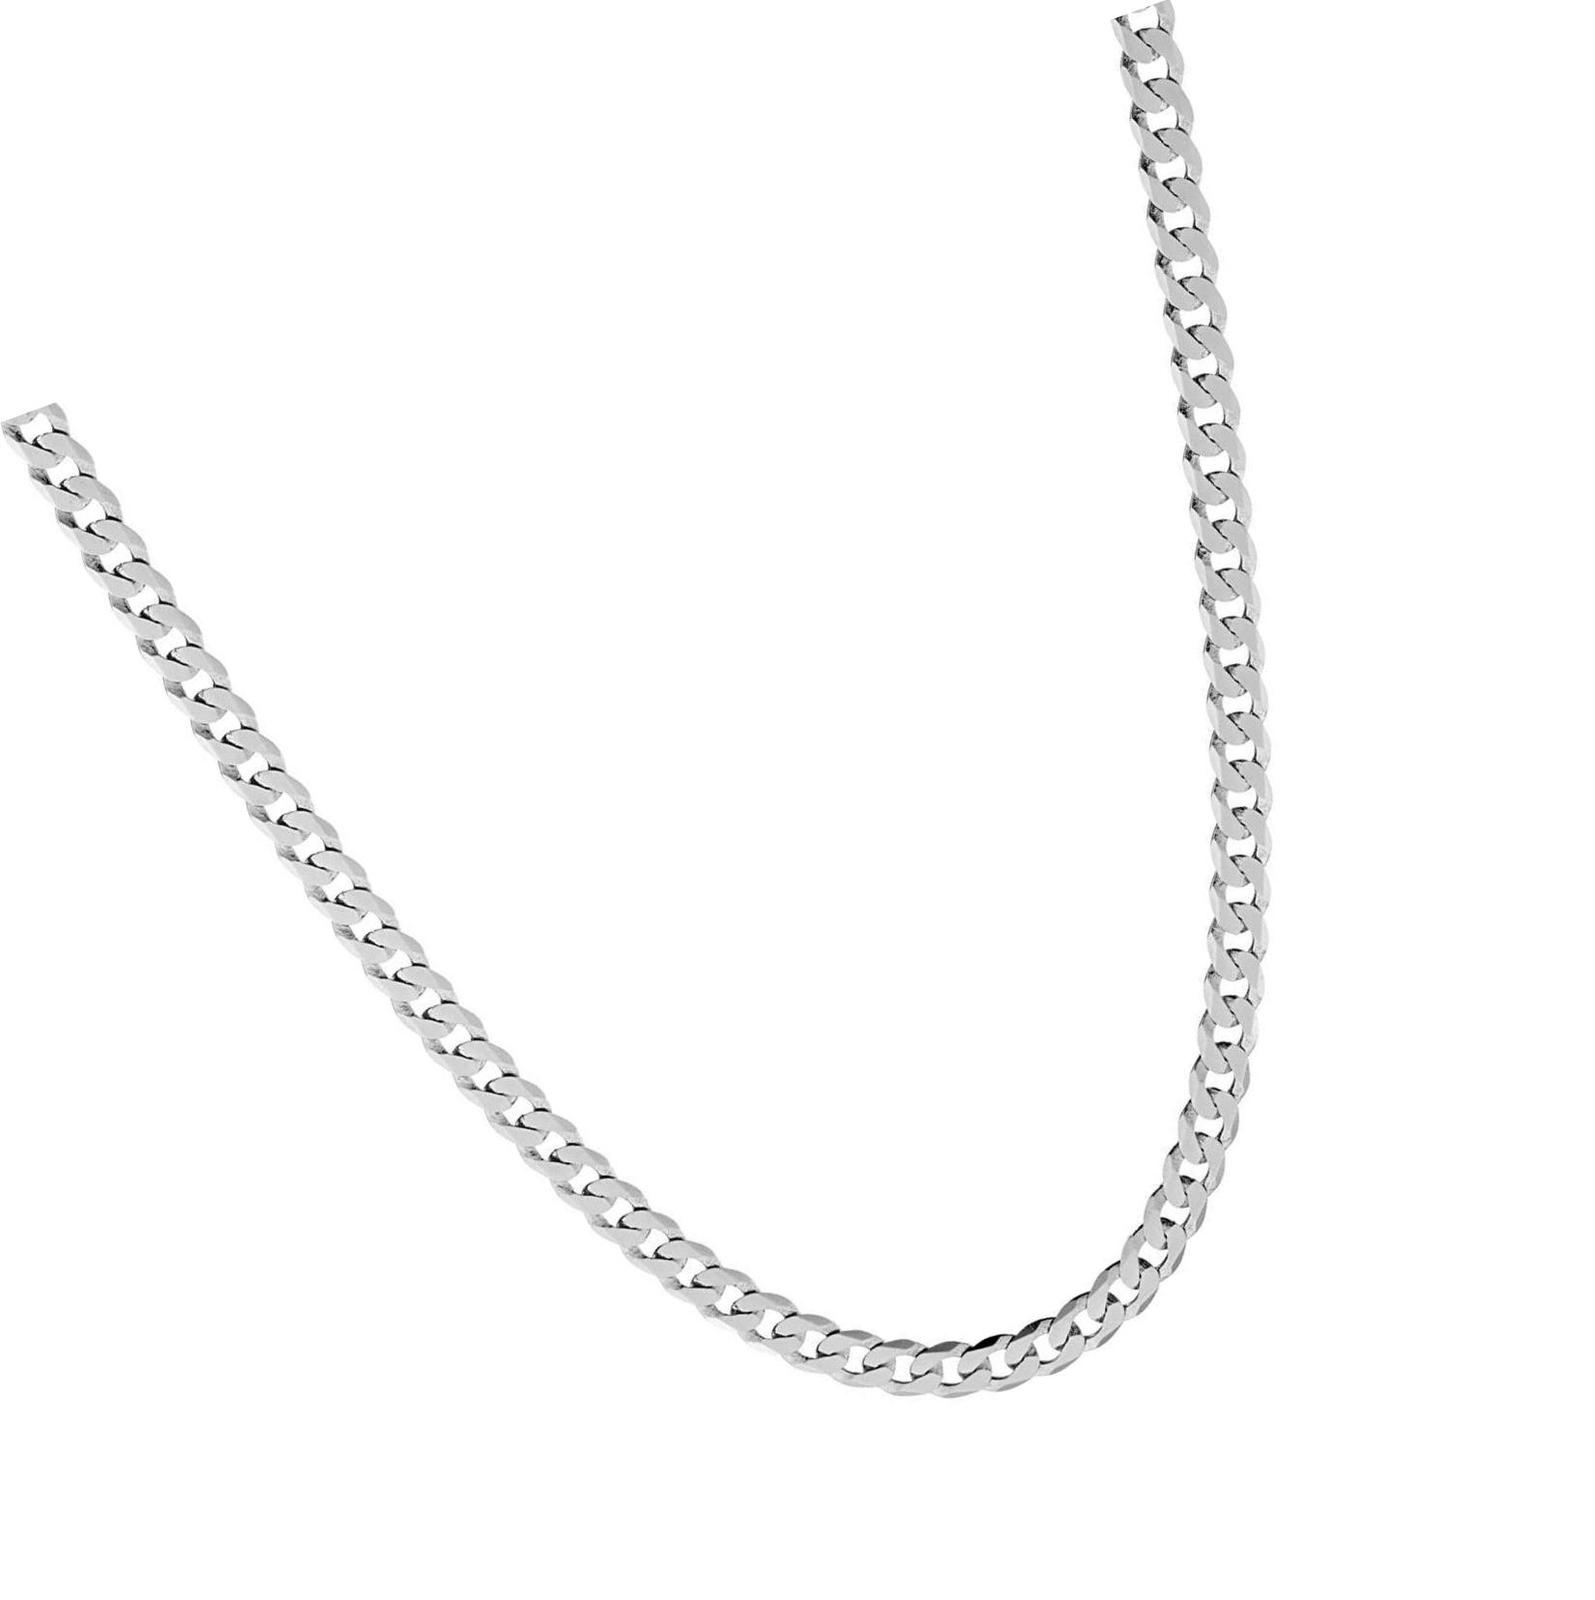 Primary image for Cuban Link Curb Chains for Men Women Boys Girls in